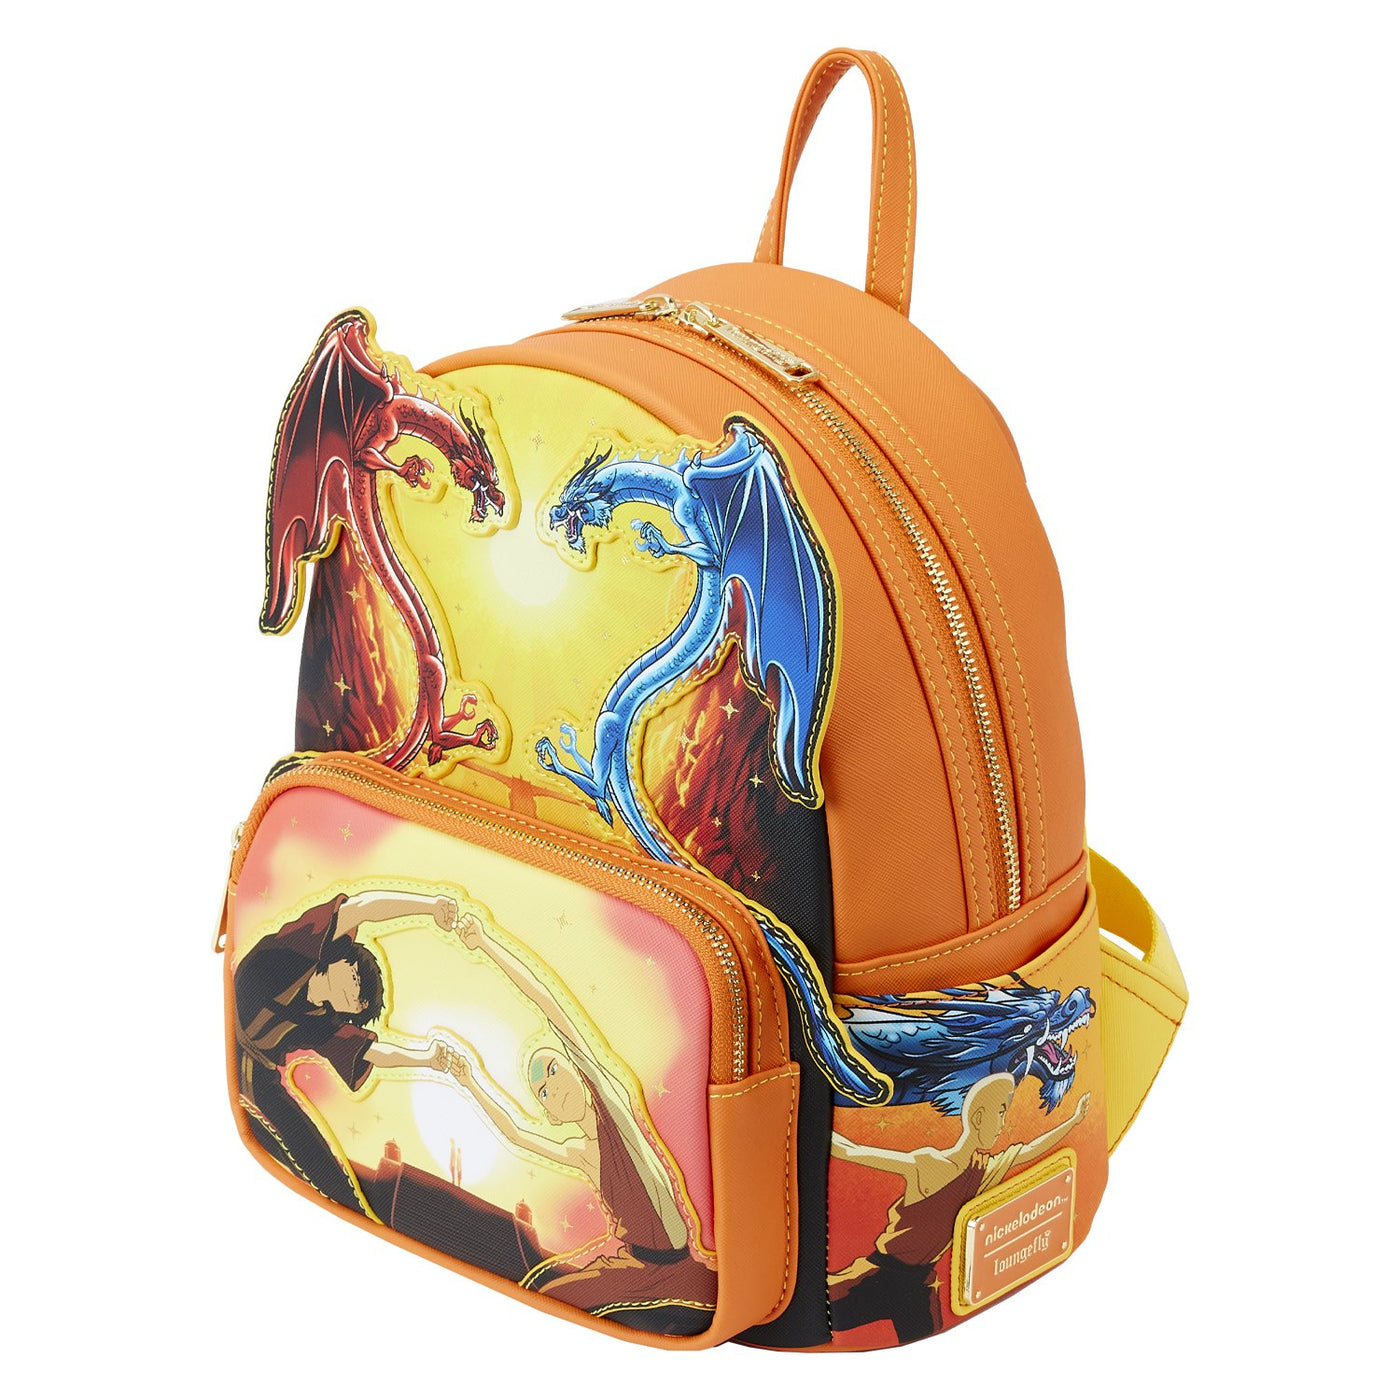 671803395190 - Loungefly Nickelodeon Avatar The Last Airbender The Fire Dance Mini Backpack - Top View